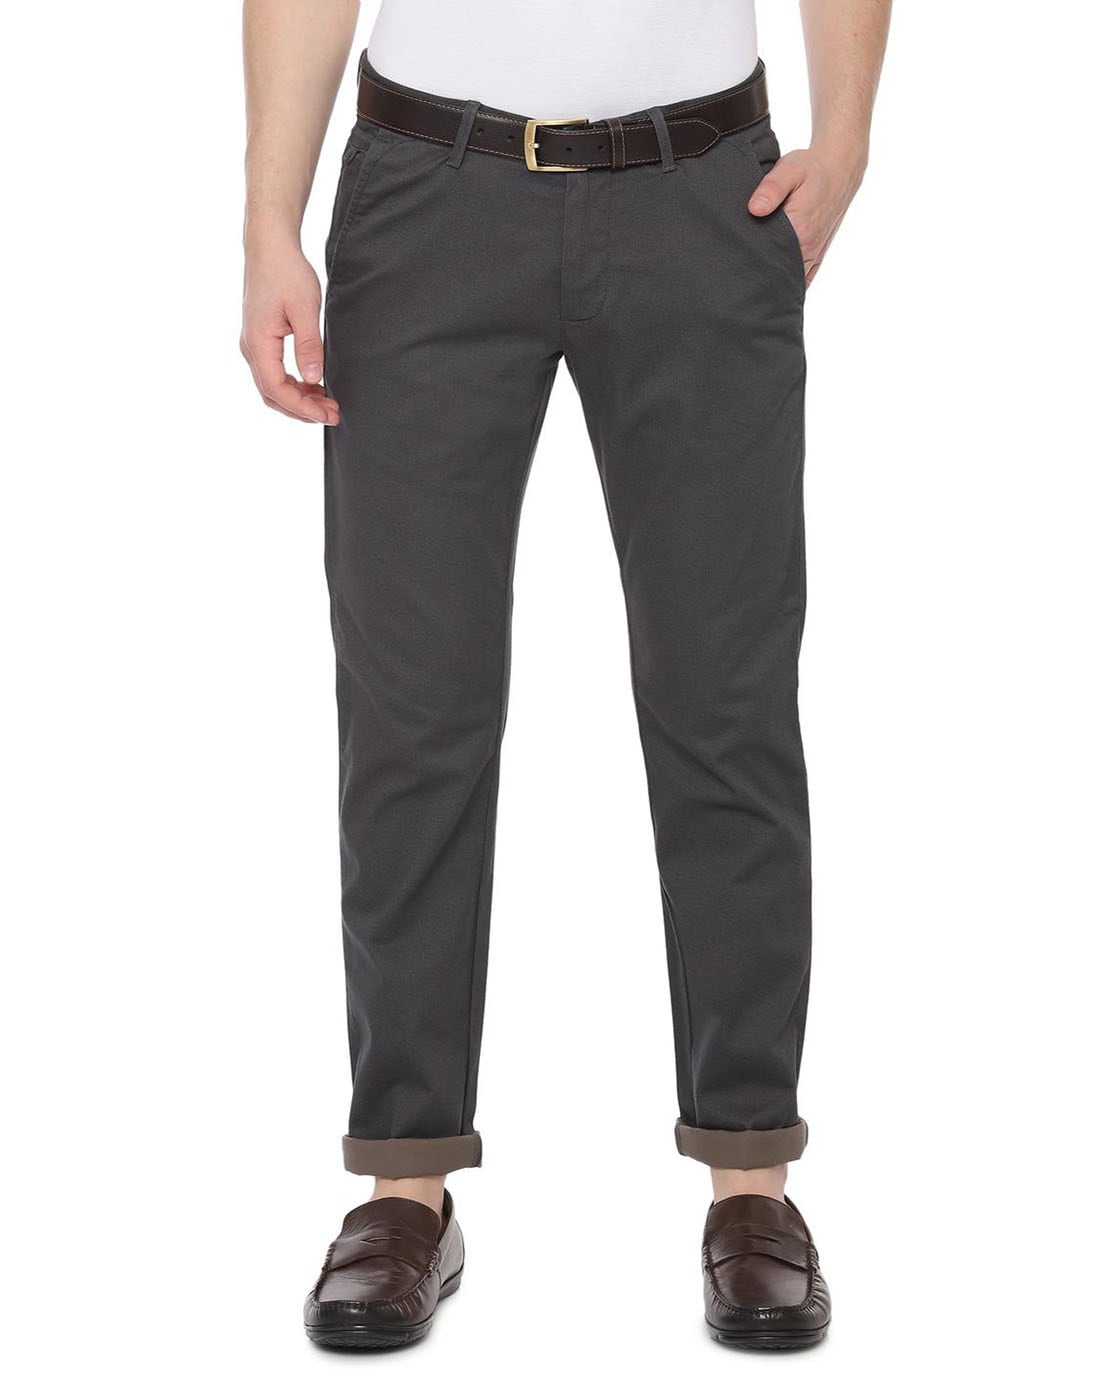 Buy Men Brown Comfort Fit Solid Business Casual Trousers Online  262141  Allen  Solly